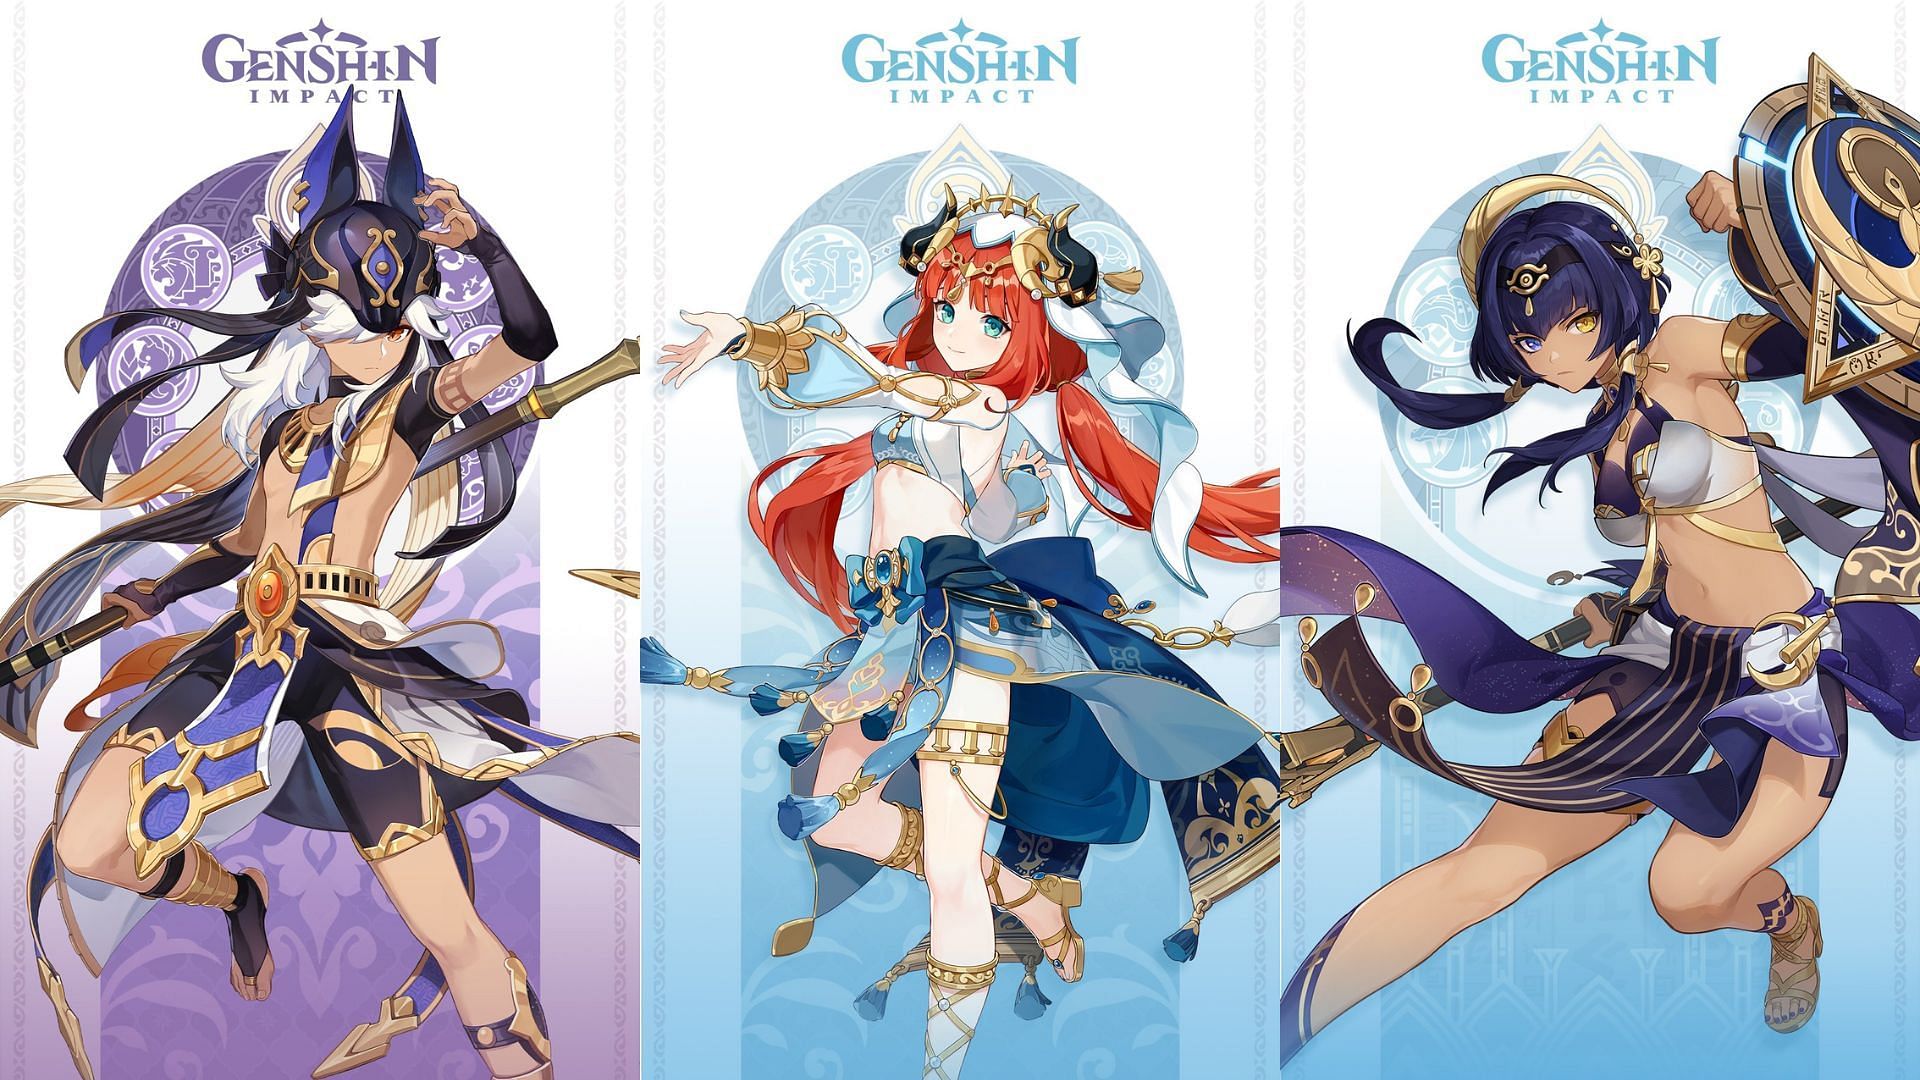 Genshin Impact 3.1 update to feature Candace, Cyno, and Nilou banners